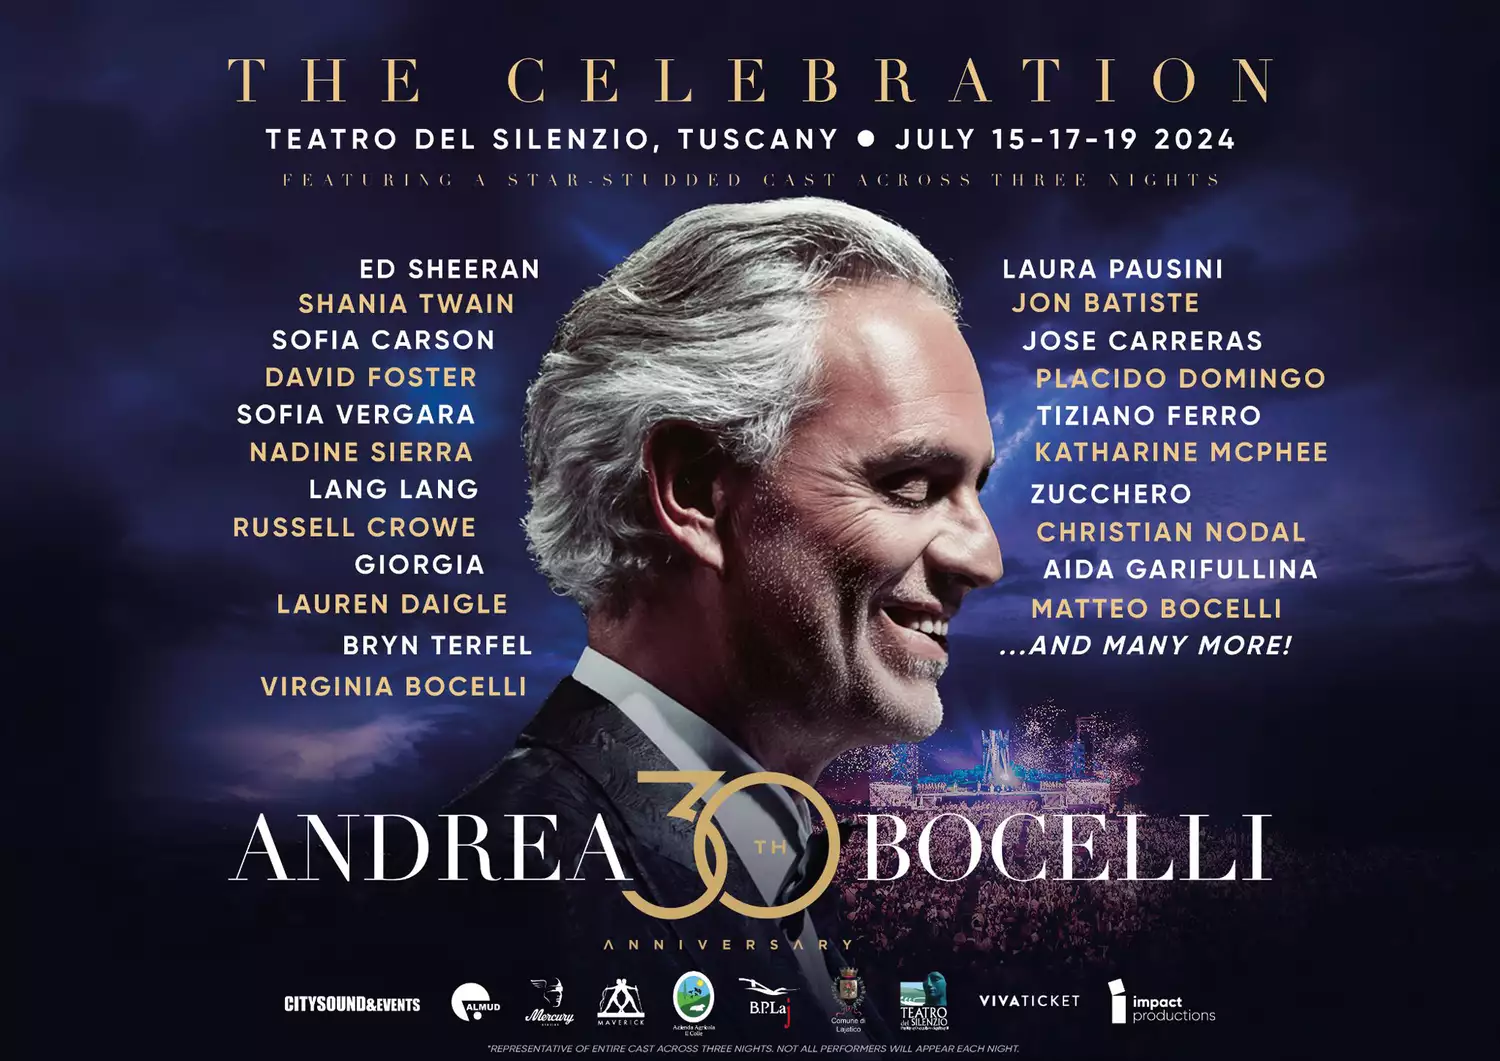 Andrea Bocelli Honors His 3 Decades In The Music Business With A 3-Day Concert Event And Concert Film, Yours Truly, News, May 4, 2024